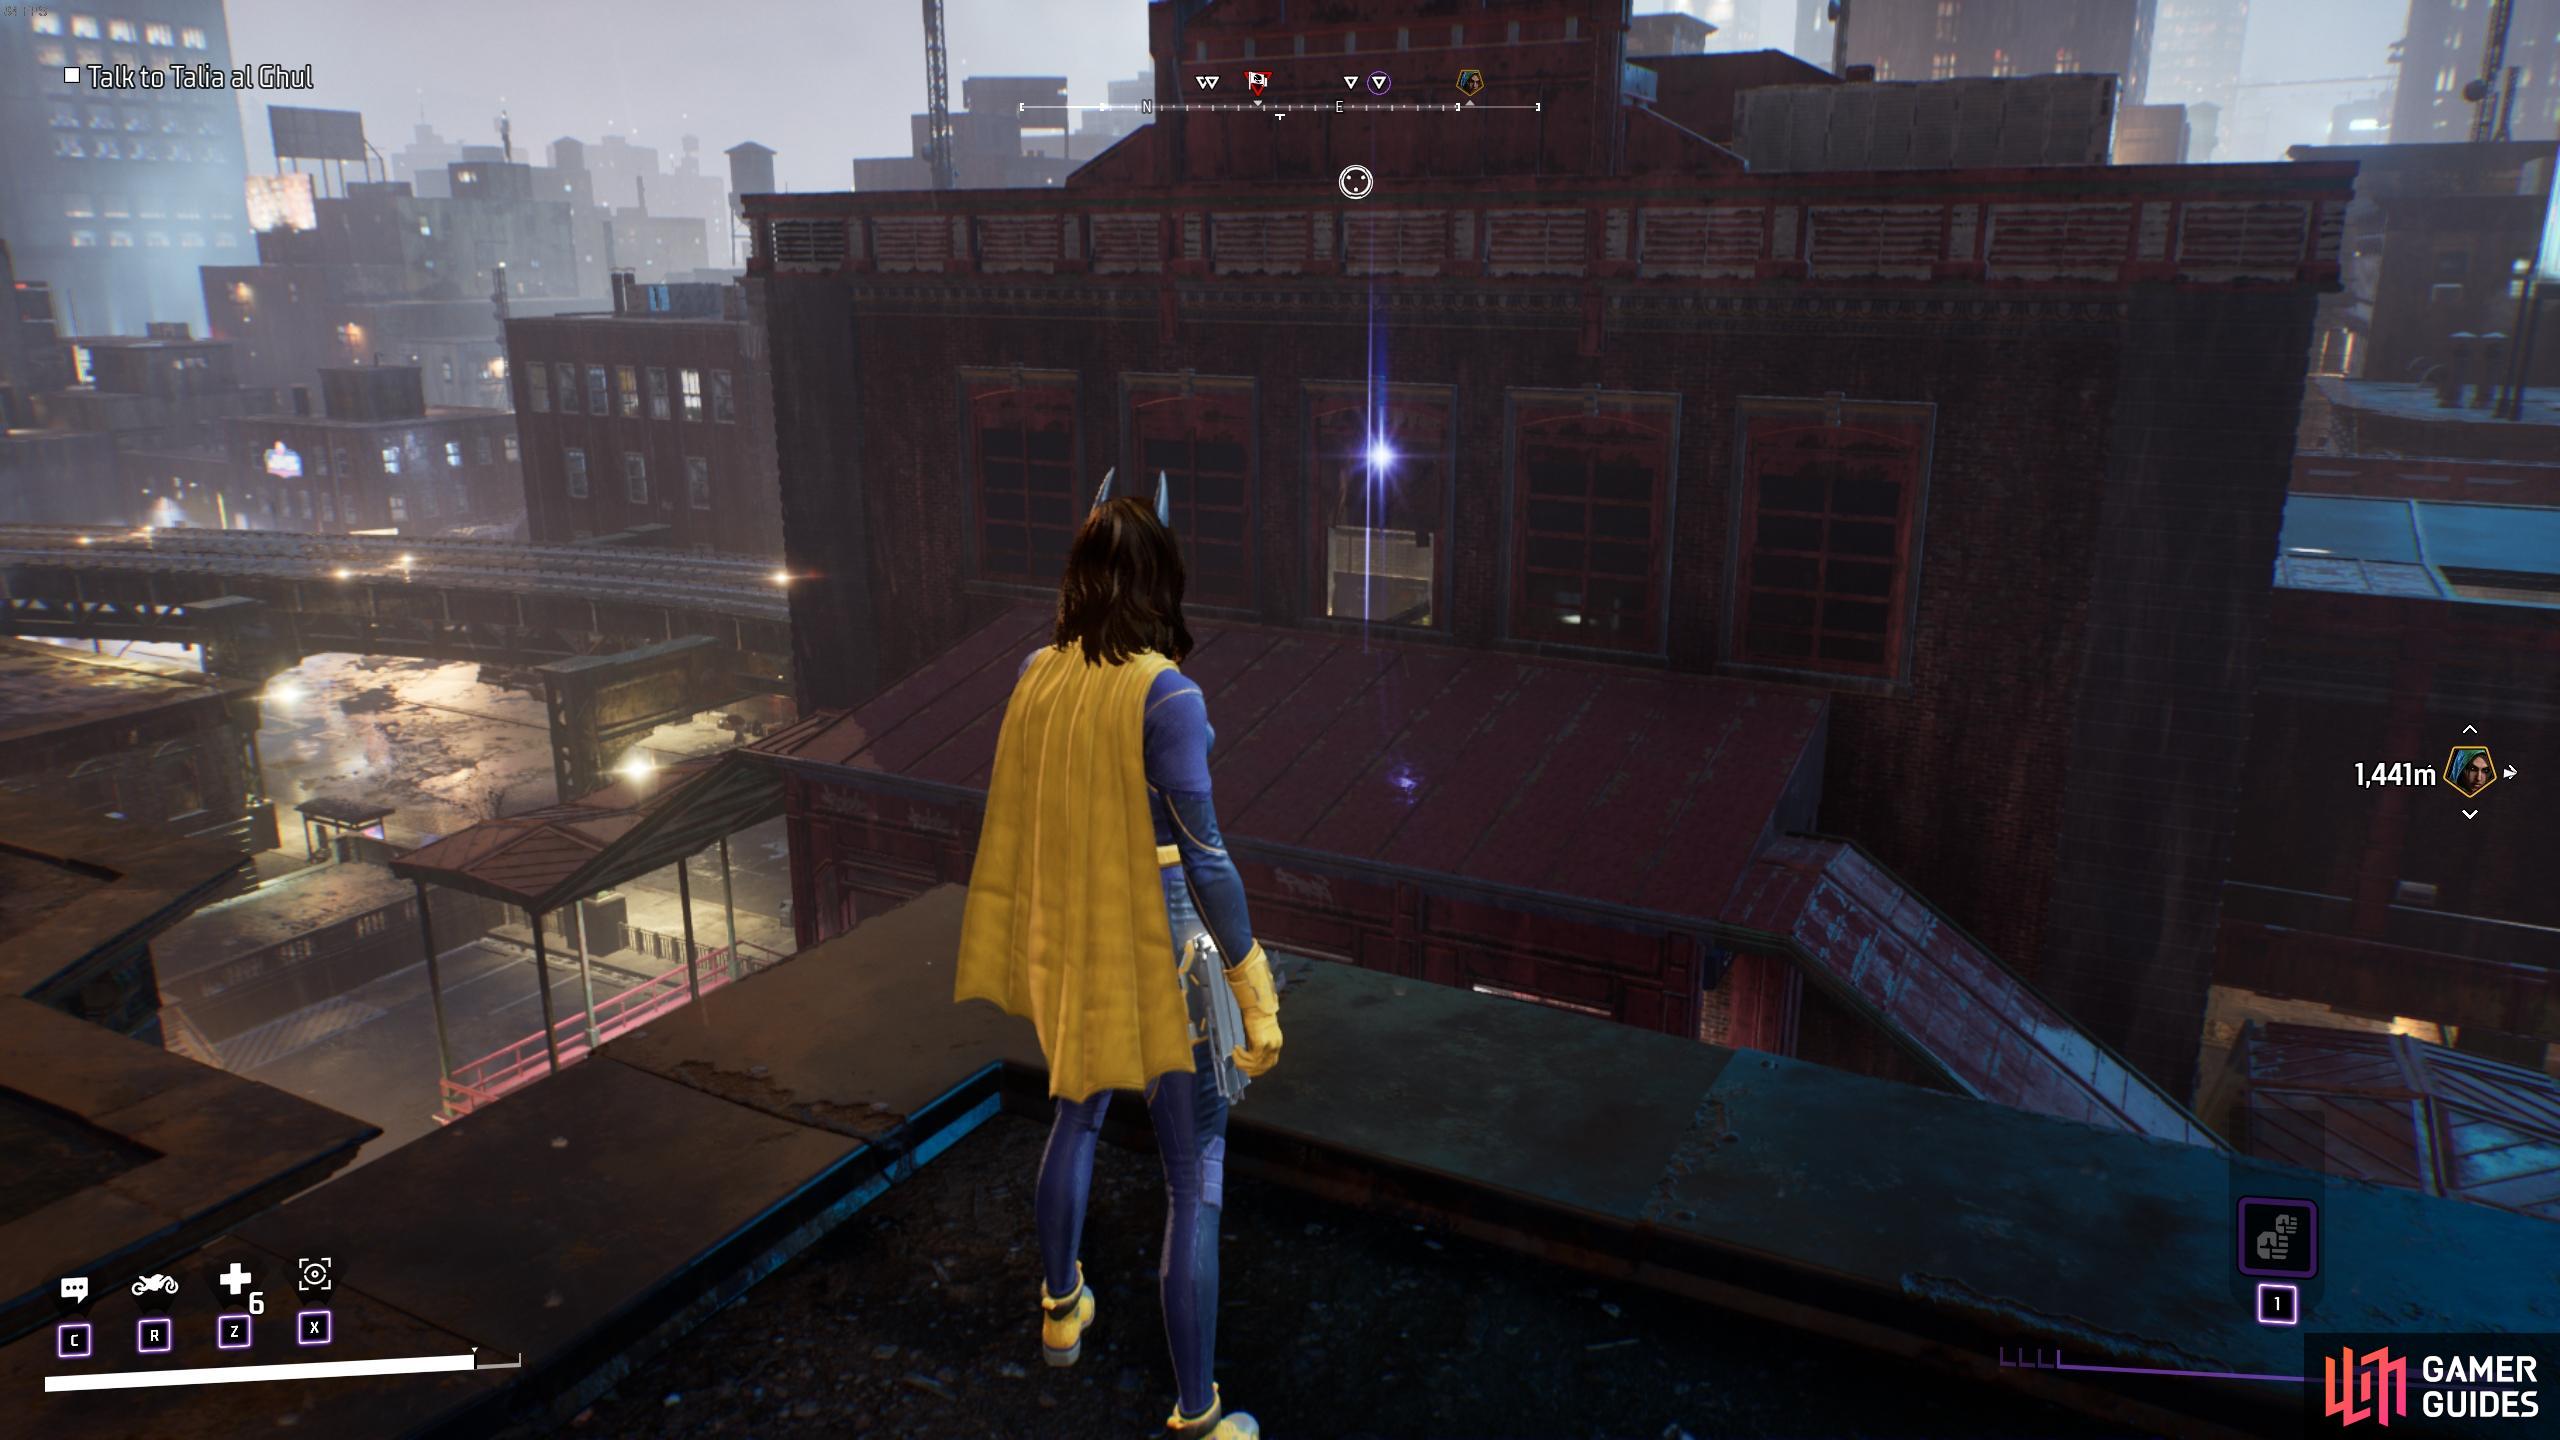 This Batarang can be found just above the broken window. You'll need to grapple above then drop down to obtain it.